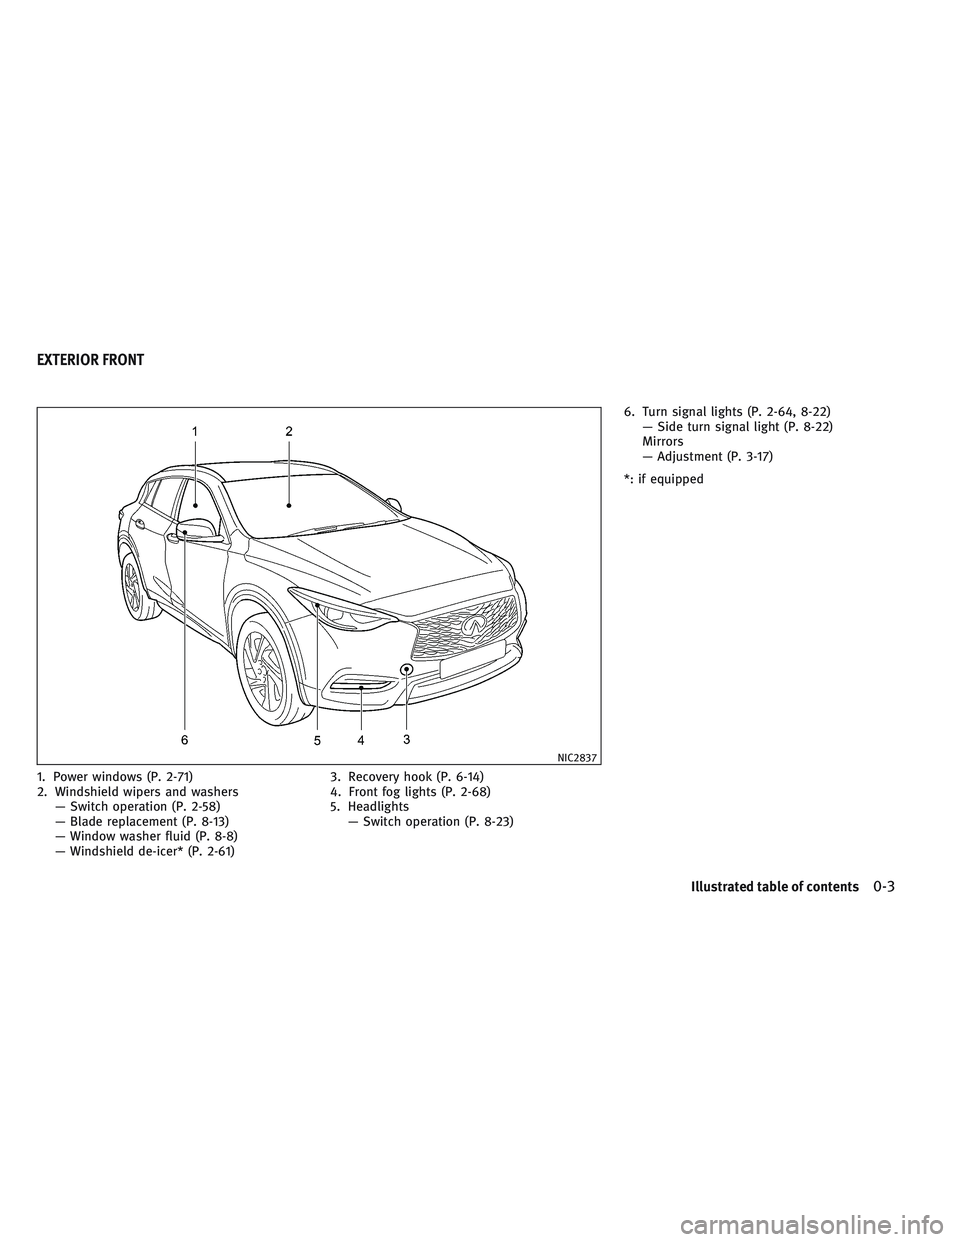 INFINITI QX30 2017  Owners Manual 1. Power windows (P. 2-71)
2. Windshield wipers and washers
— Switch operation (P. 2-58)
— Blade replacement (P. 8-13)
— Window washer fluid (P. 8-8)
— Windshield de-icer* (P. 2-61)3. Recovery